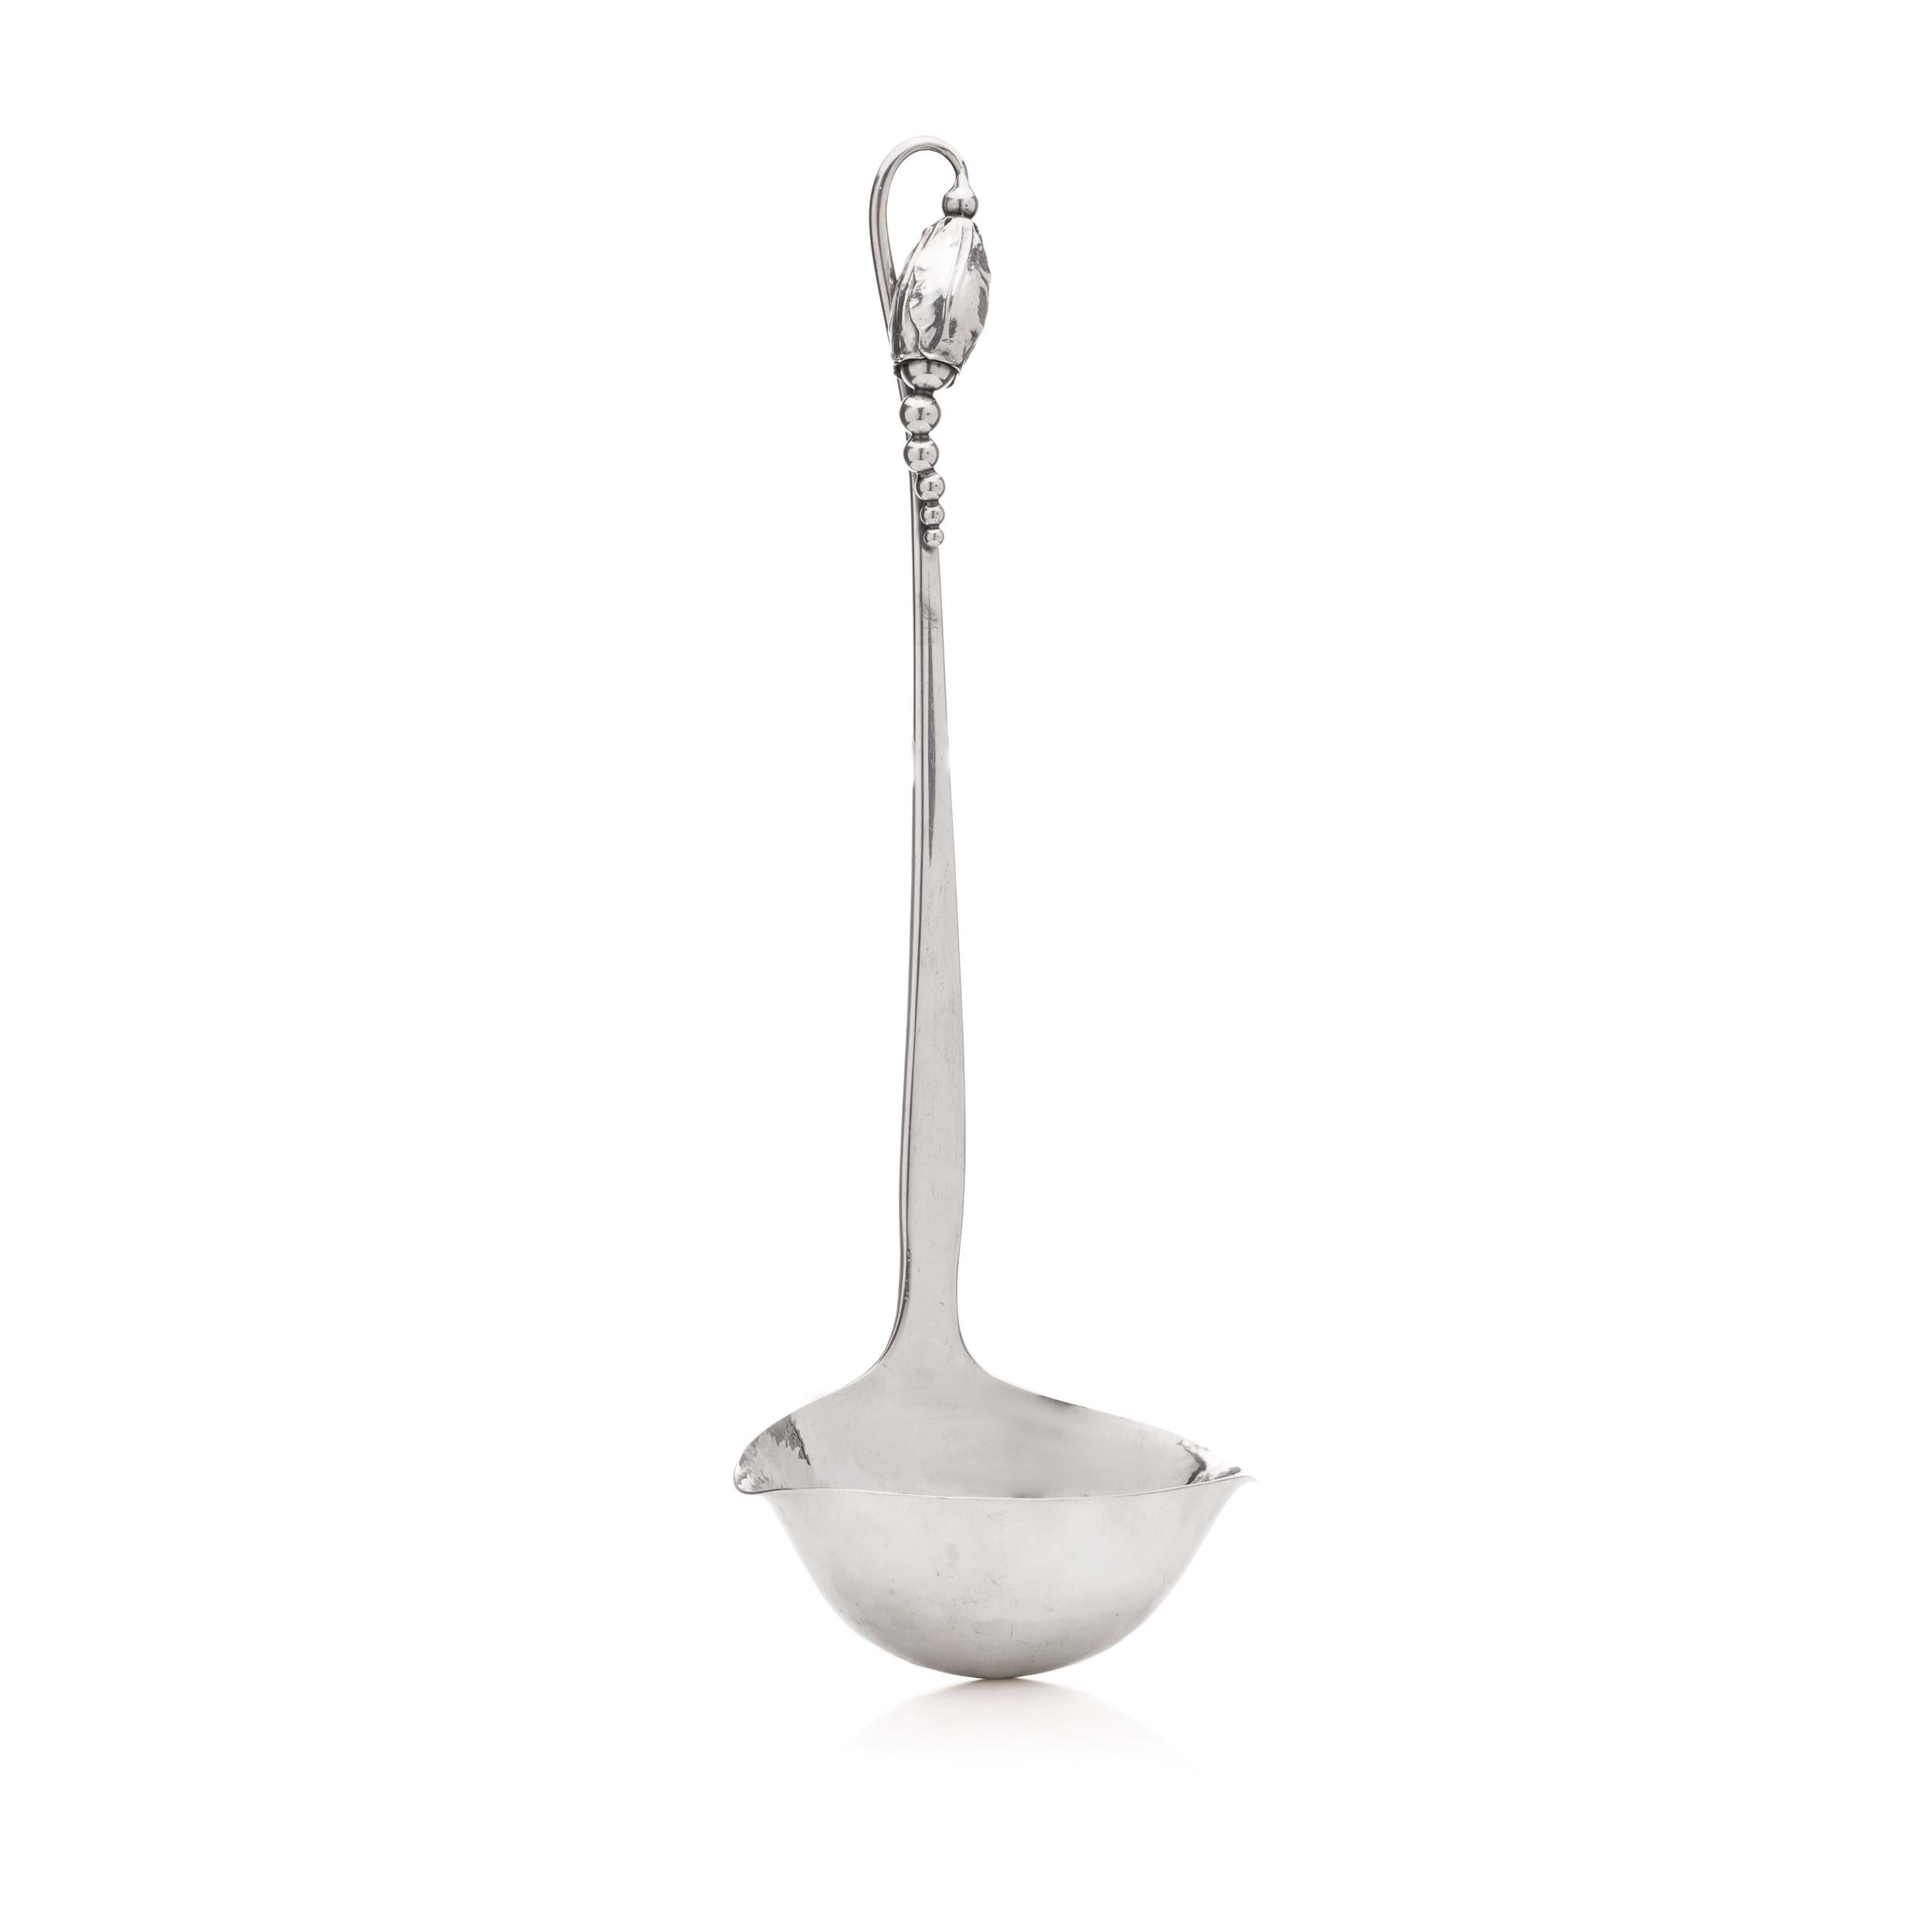 Georg Jensen Sterling Silver Blossom No 84 Cream ladle. 

Dimensions:
Length: 33.5 cm 
Widest point: 11.5 cm 
Weight: 231  grams in total 

Condition: The item is pre-owned, and in excellent condition overall. 